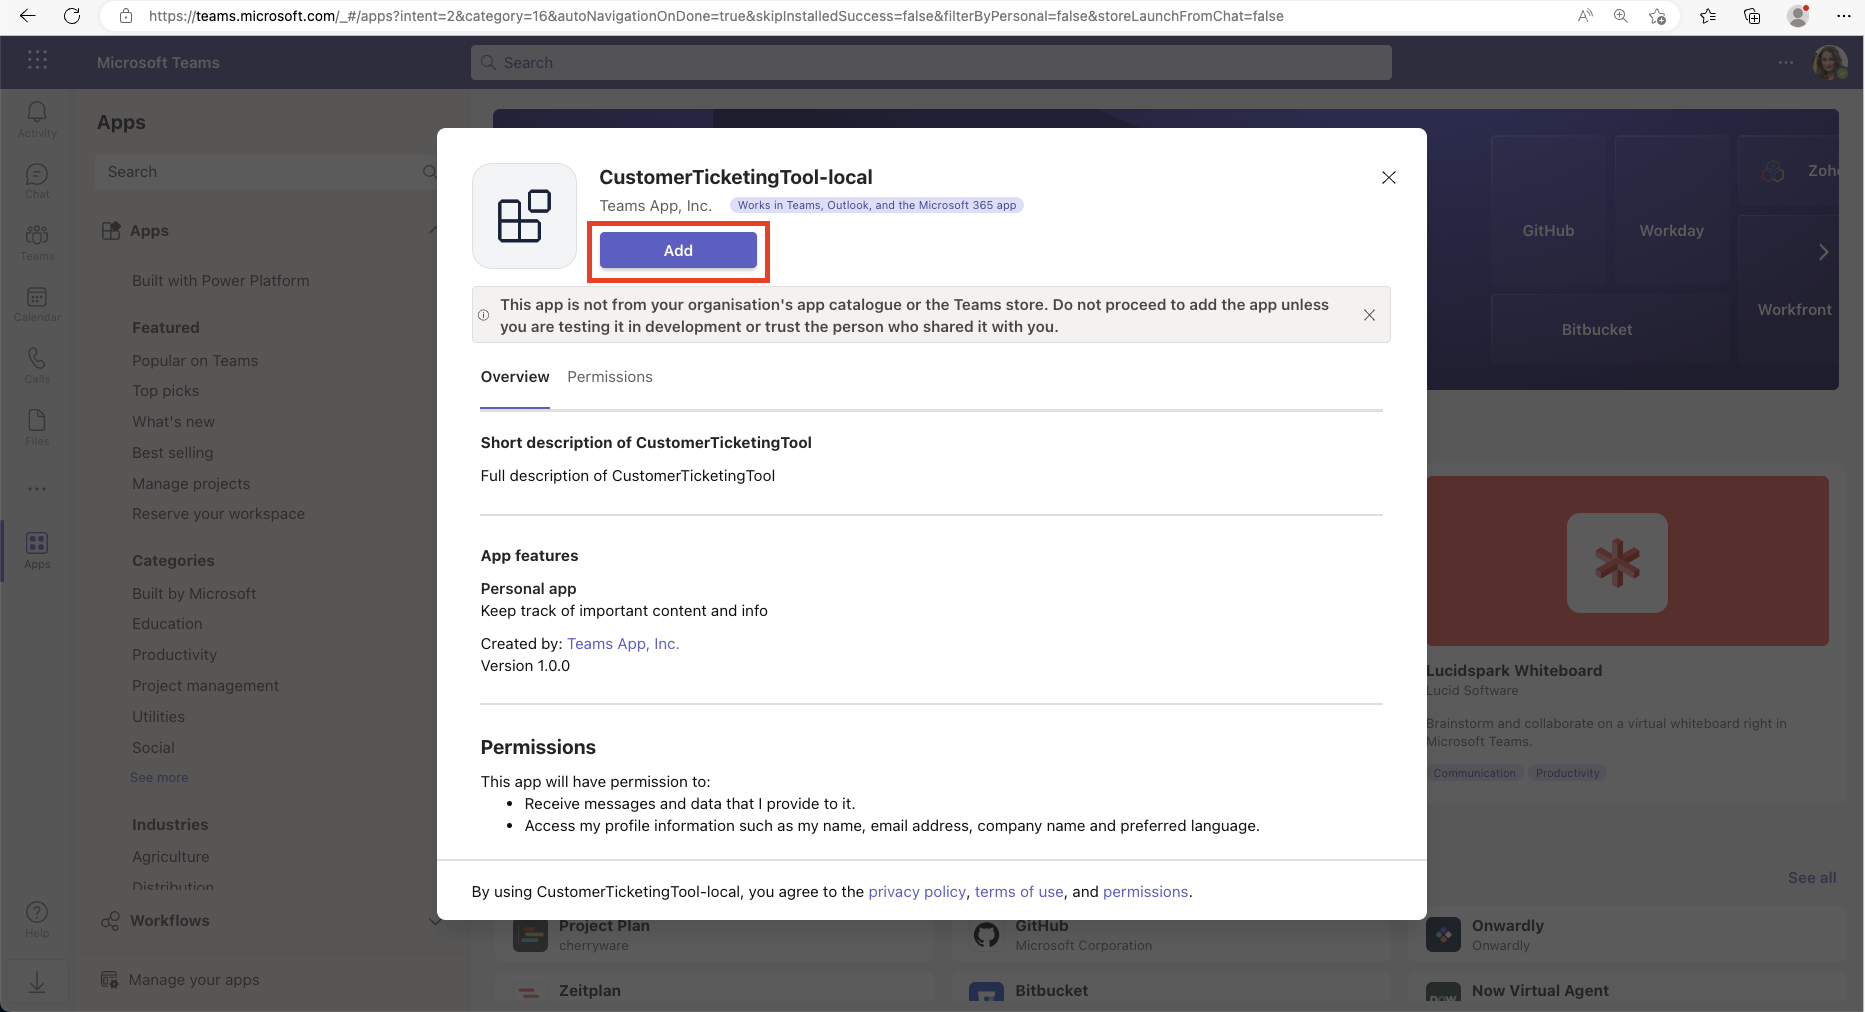 Screenshot that shows the button for adding an app to Microsoft Teams.